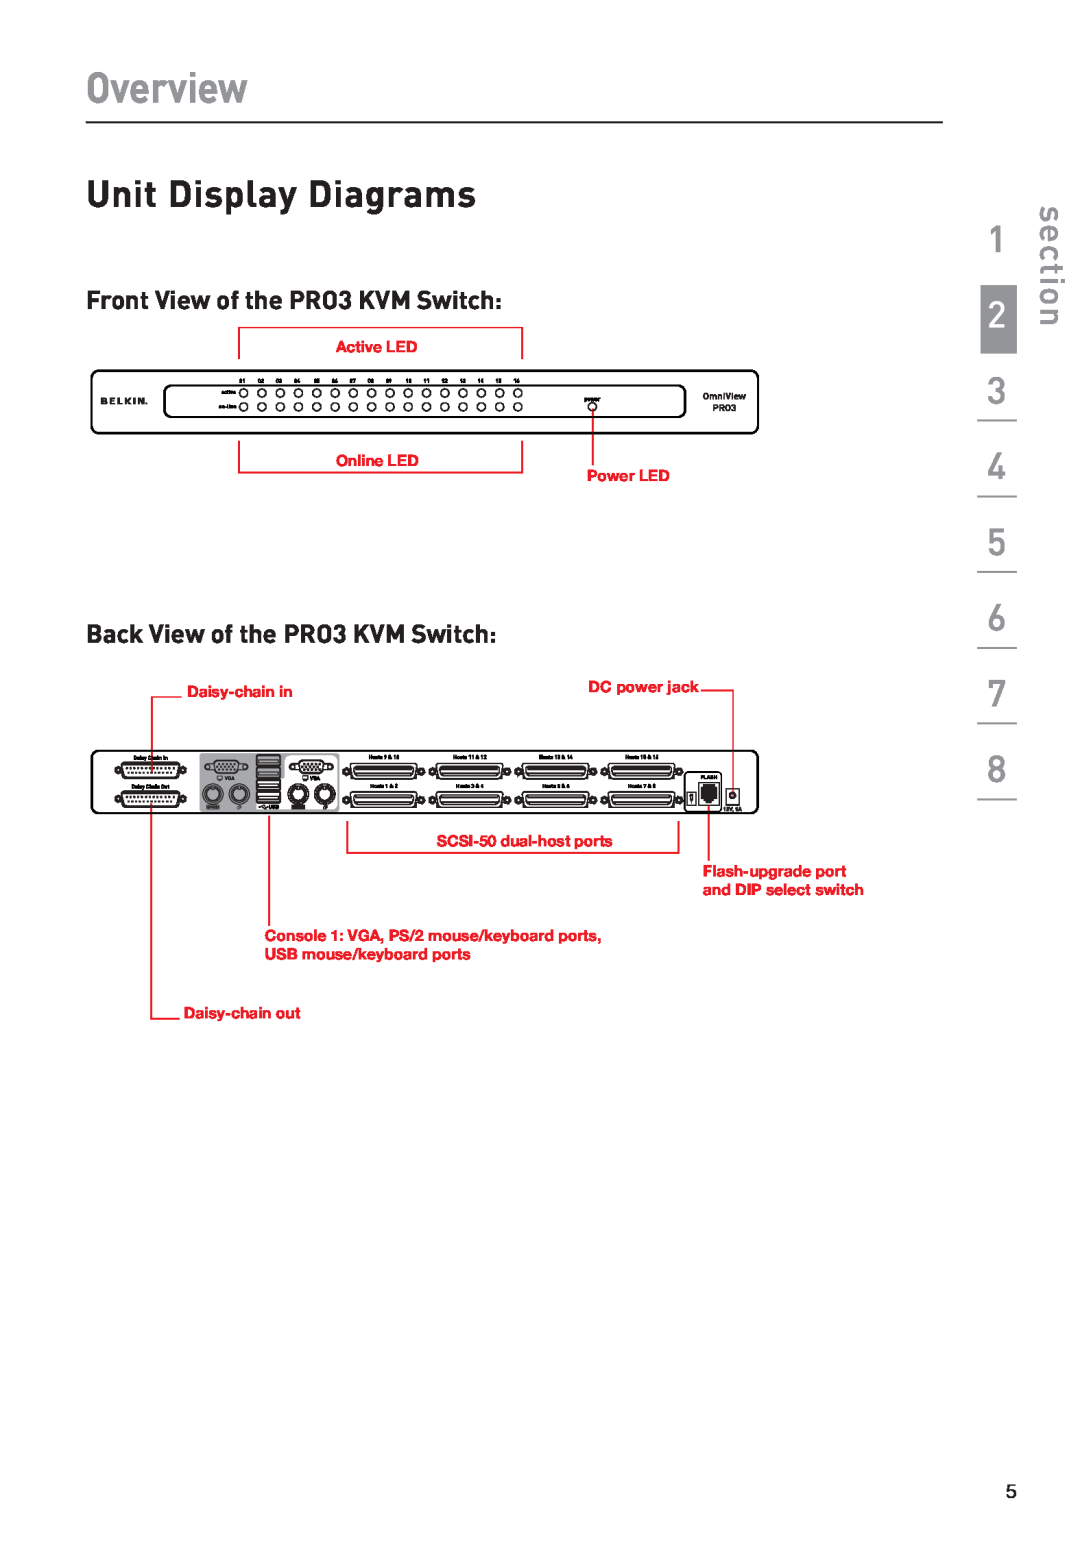 Belkin F1DA208Z manual Unit Display Diagrams, Front View of the PRO3 KVM Switch, Back View of the PRO3 KVM Switch, Overview 